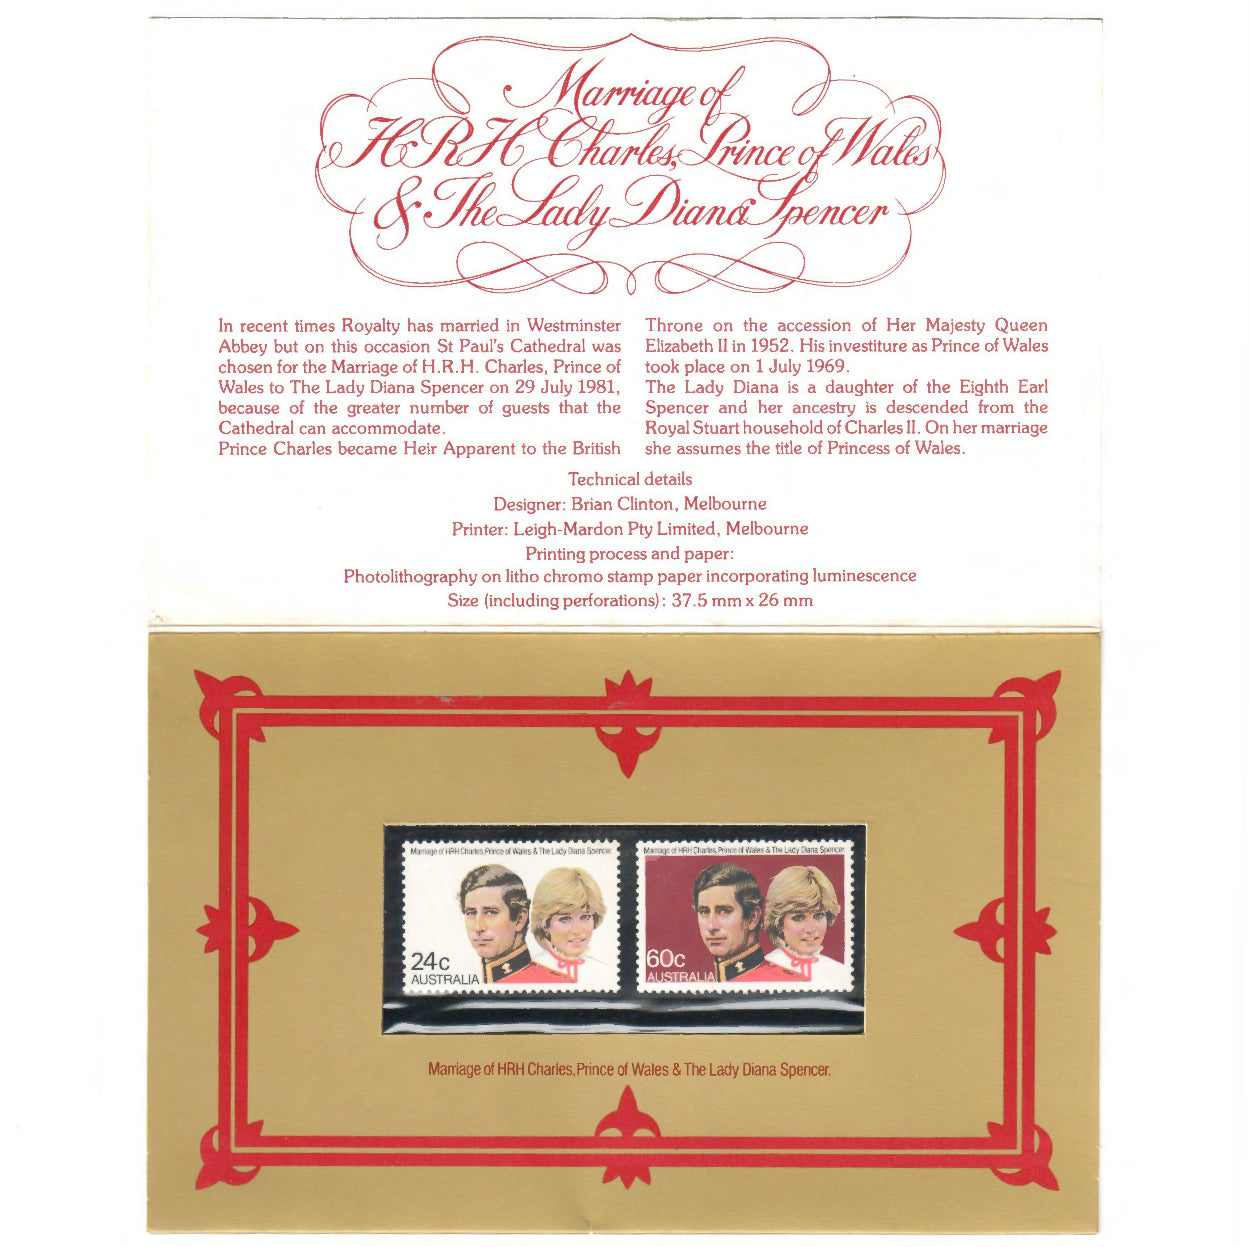 Australia 1981 FDC Marriage Of Prince Charles & Lady Diana - FDI 29 July 1981 + Stamp Pack